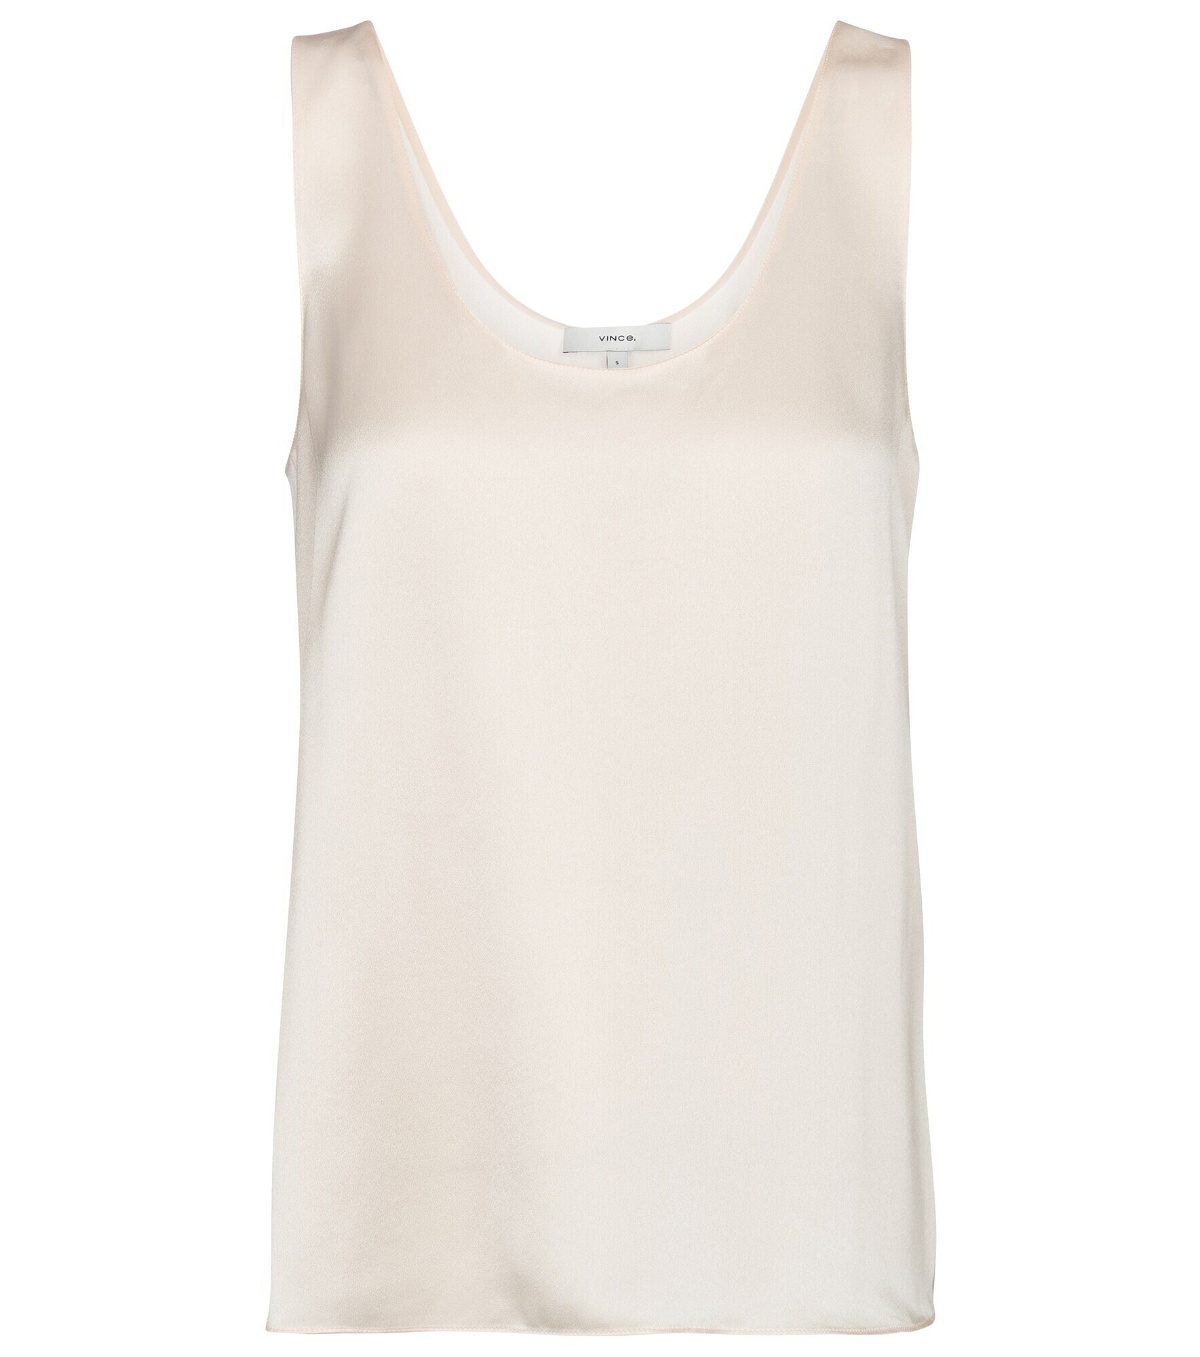 Satin tank top in silver - Vince